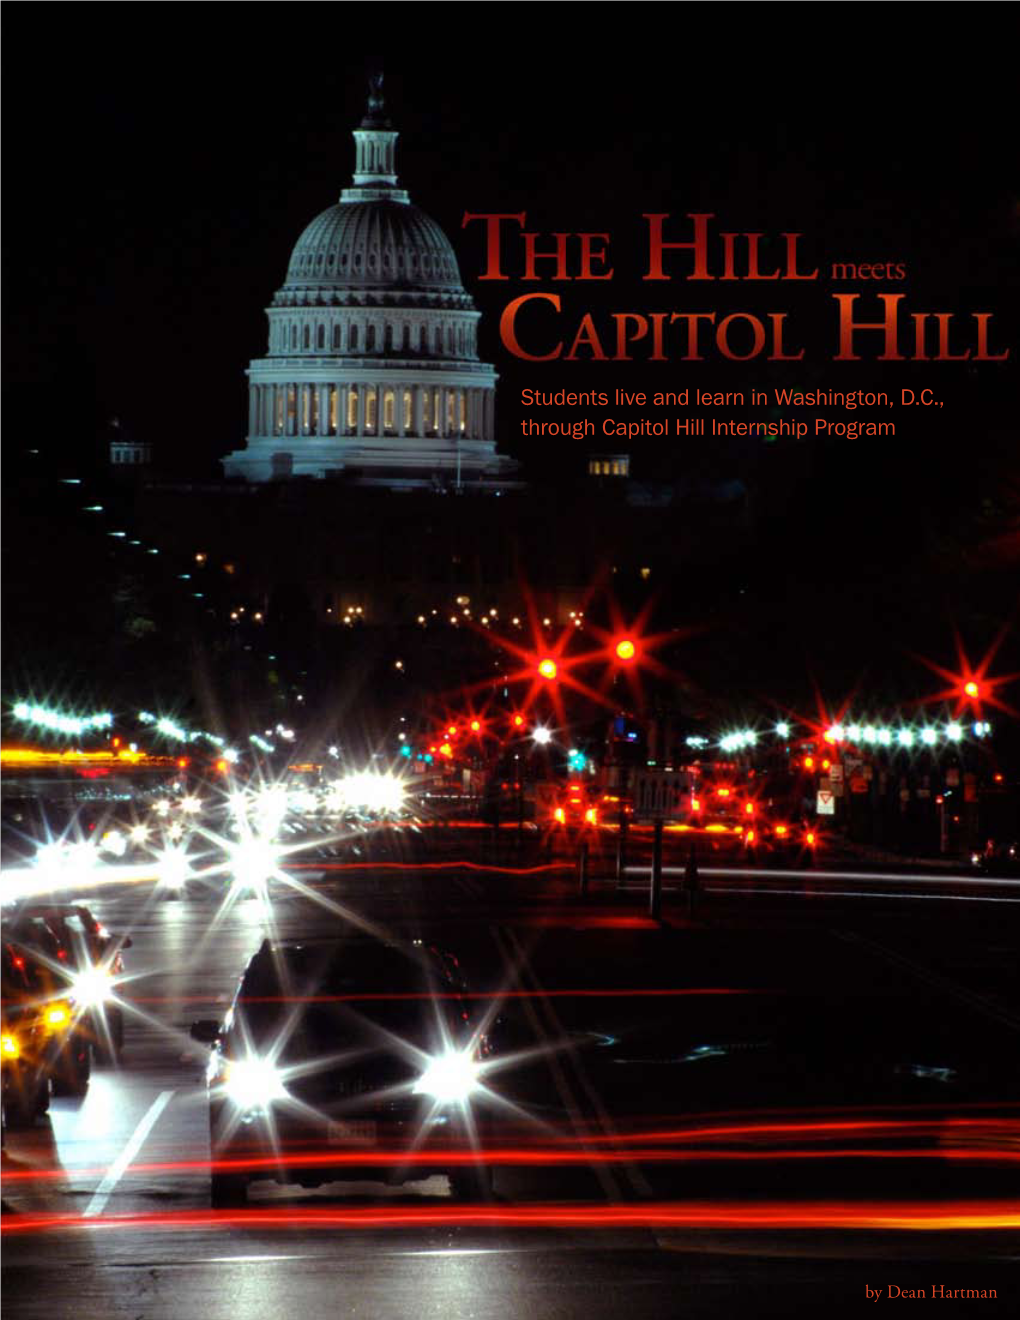 Students Live and Learn in Washington, D.C., Through Capitol Hill Internship Program